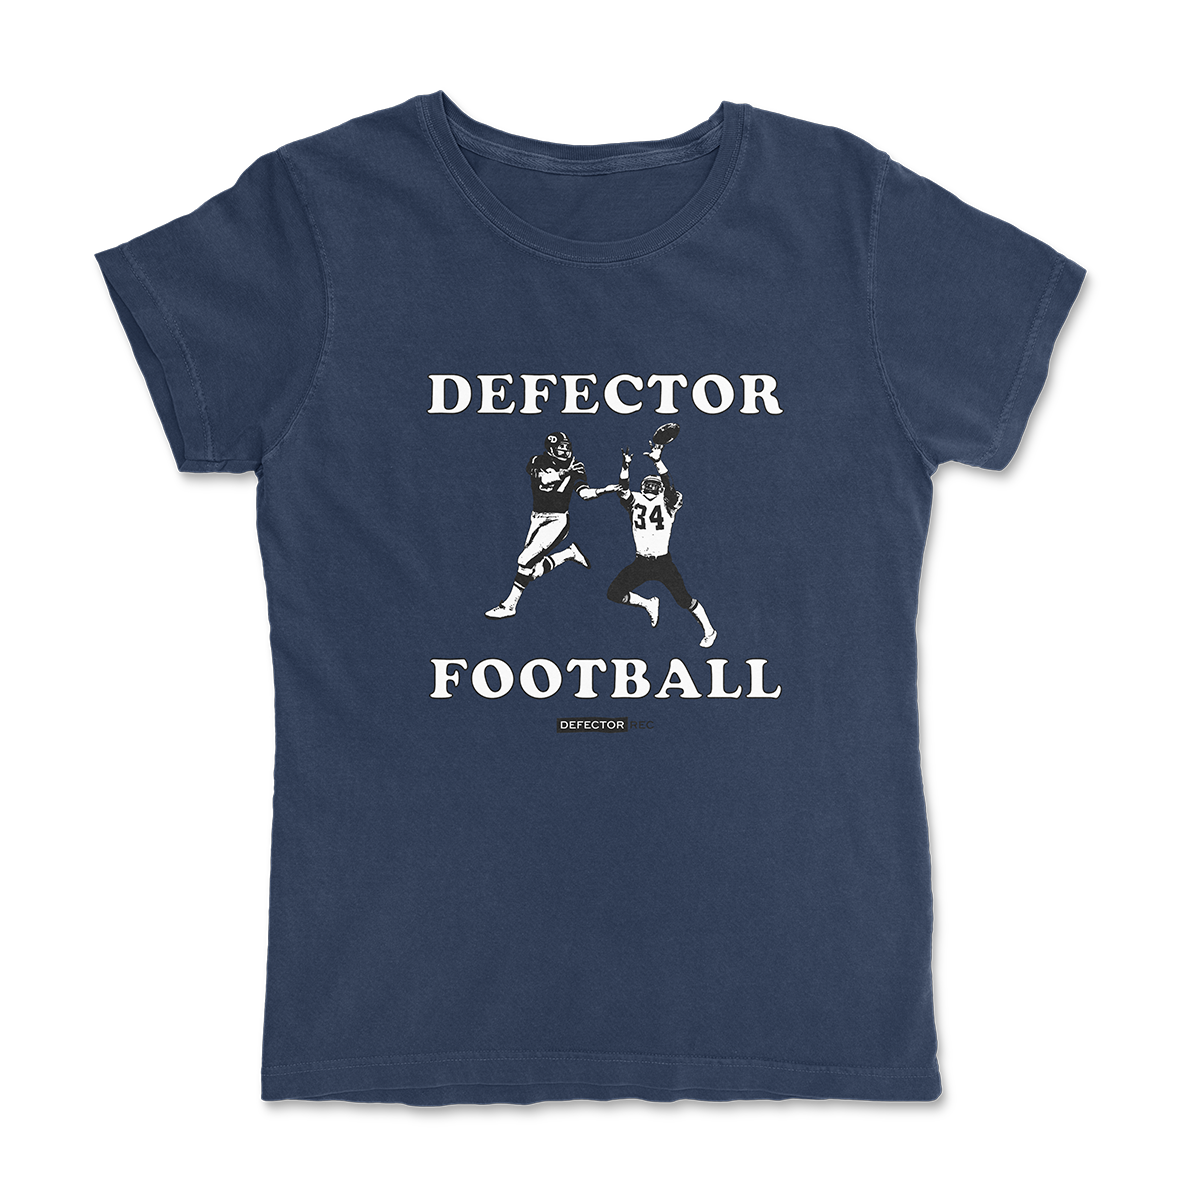 Defector shirt that says “DEFECTOR FOOTBALL.” Features clip art of American football players.  Navy shirt in ‘femme’ cut.